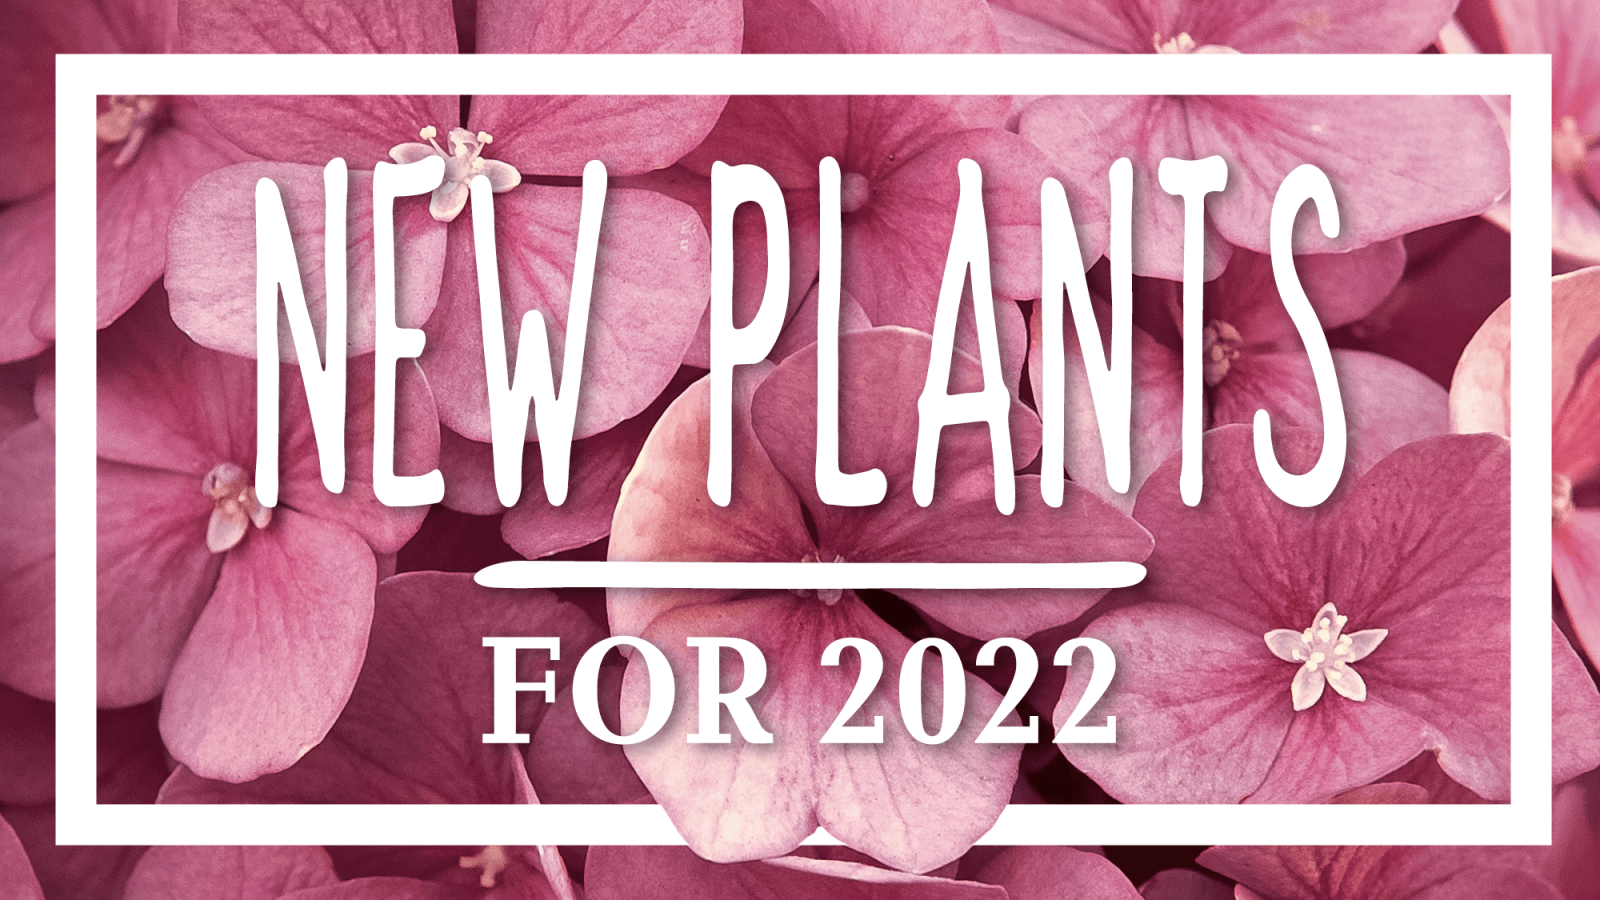 New plants for 2022